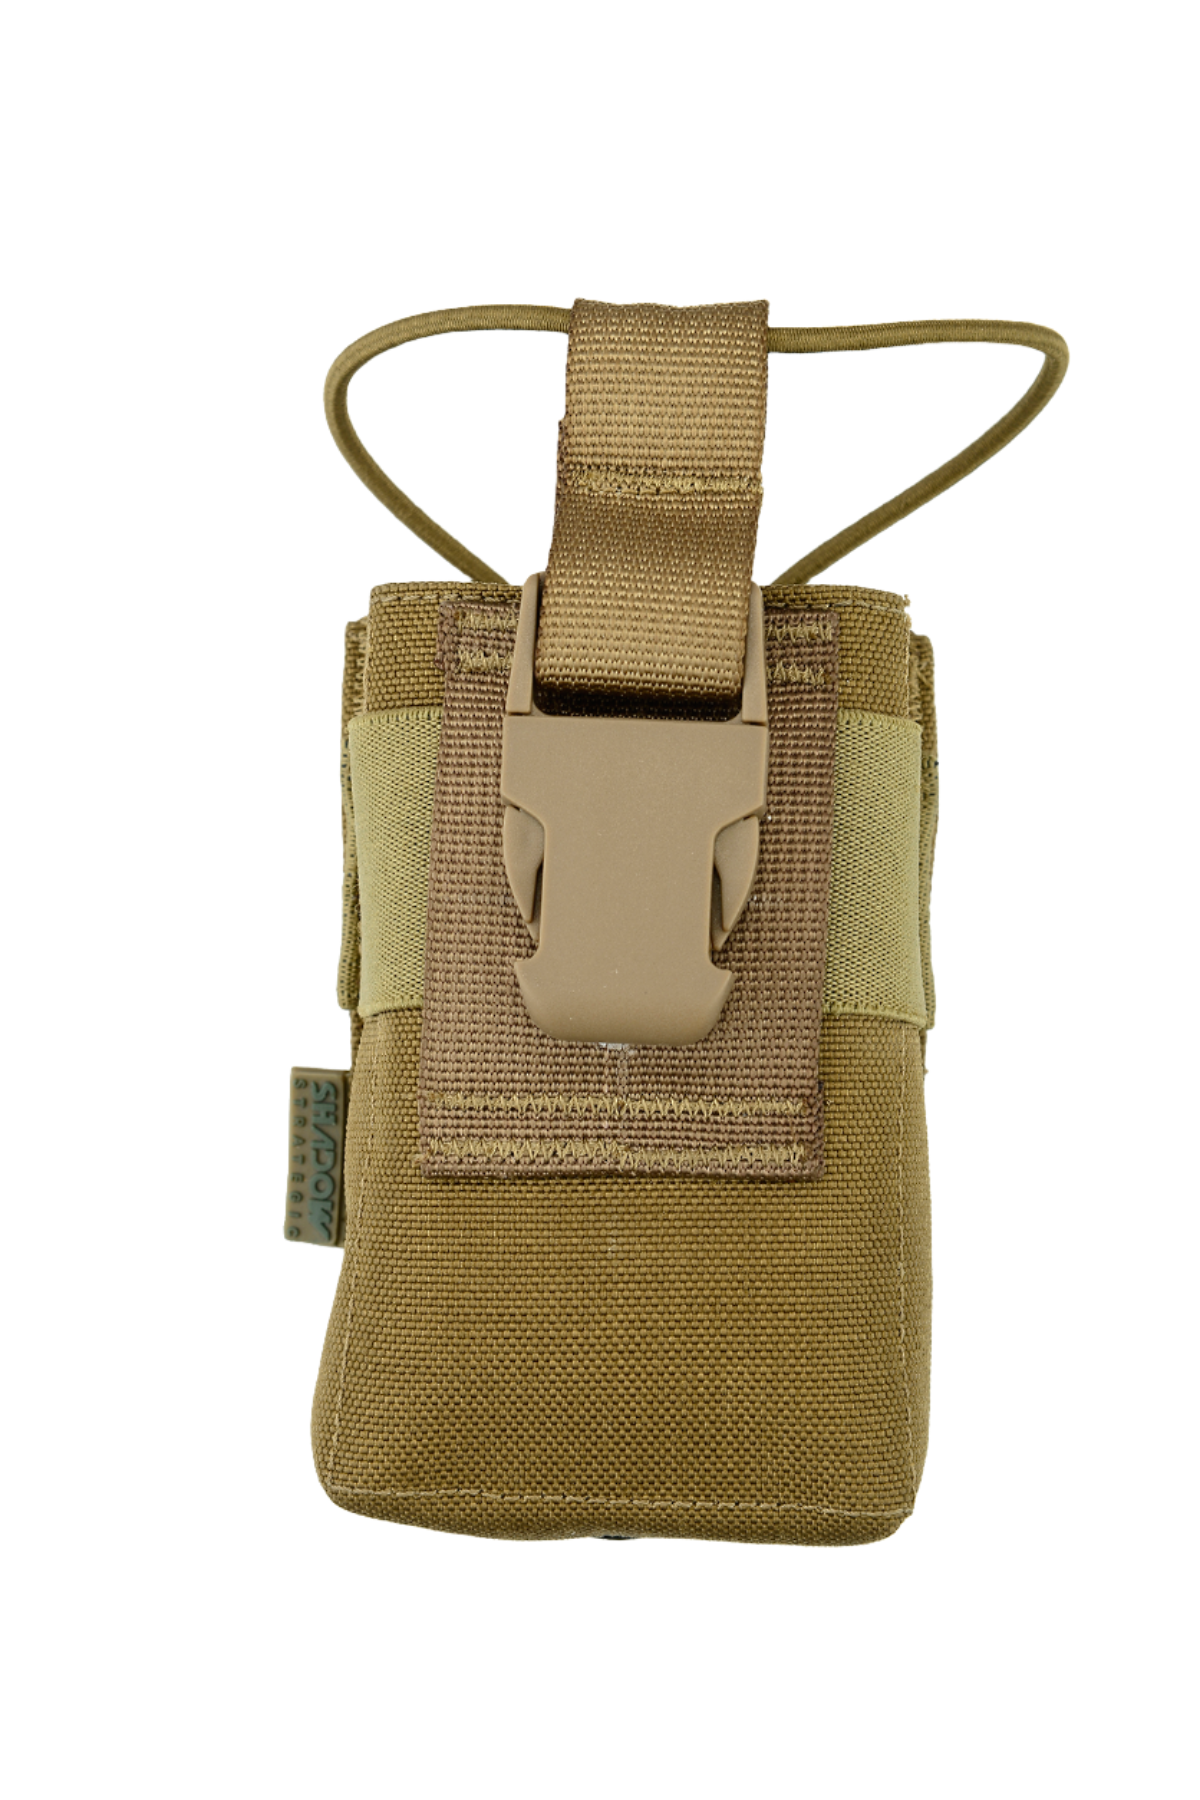 SHE-21090 "ARP" ADJUSTABLE RADIO POUCH COYOTE COLOUR